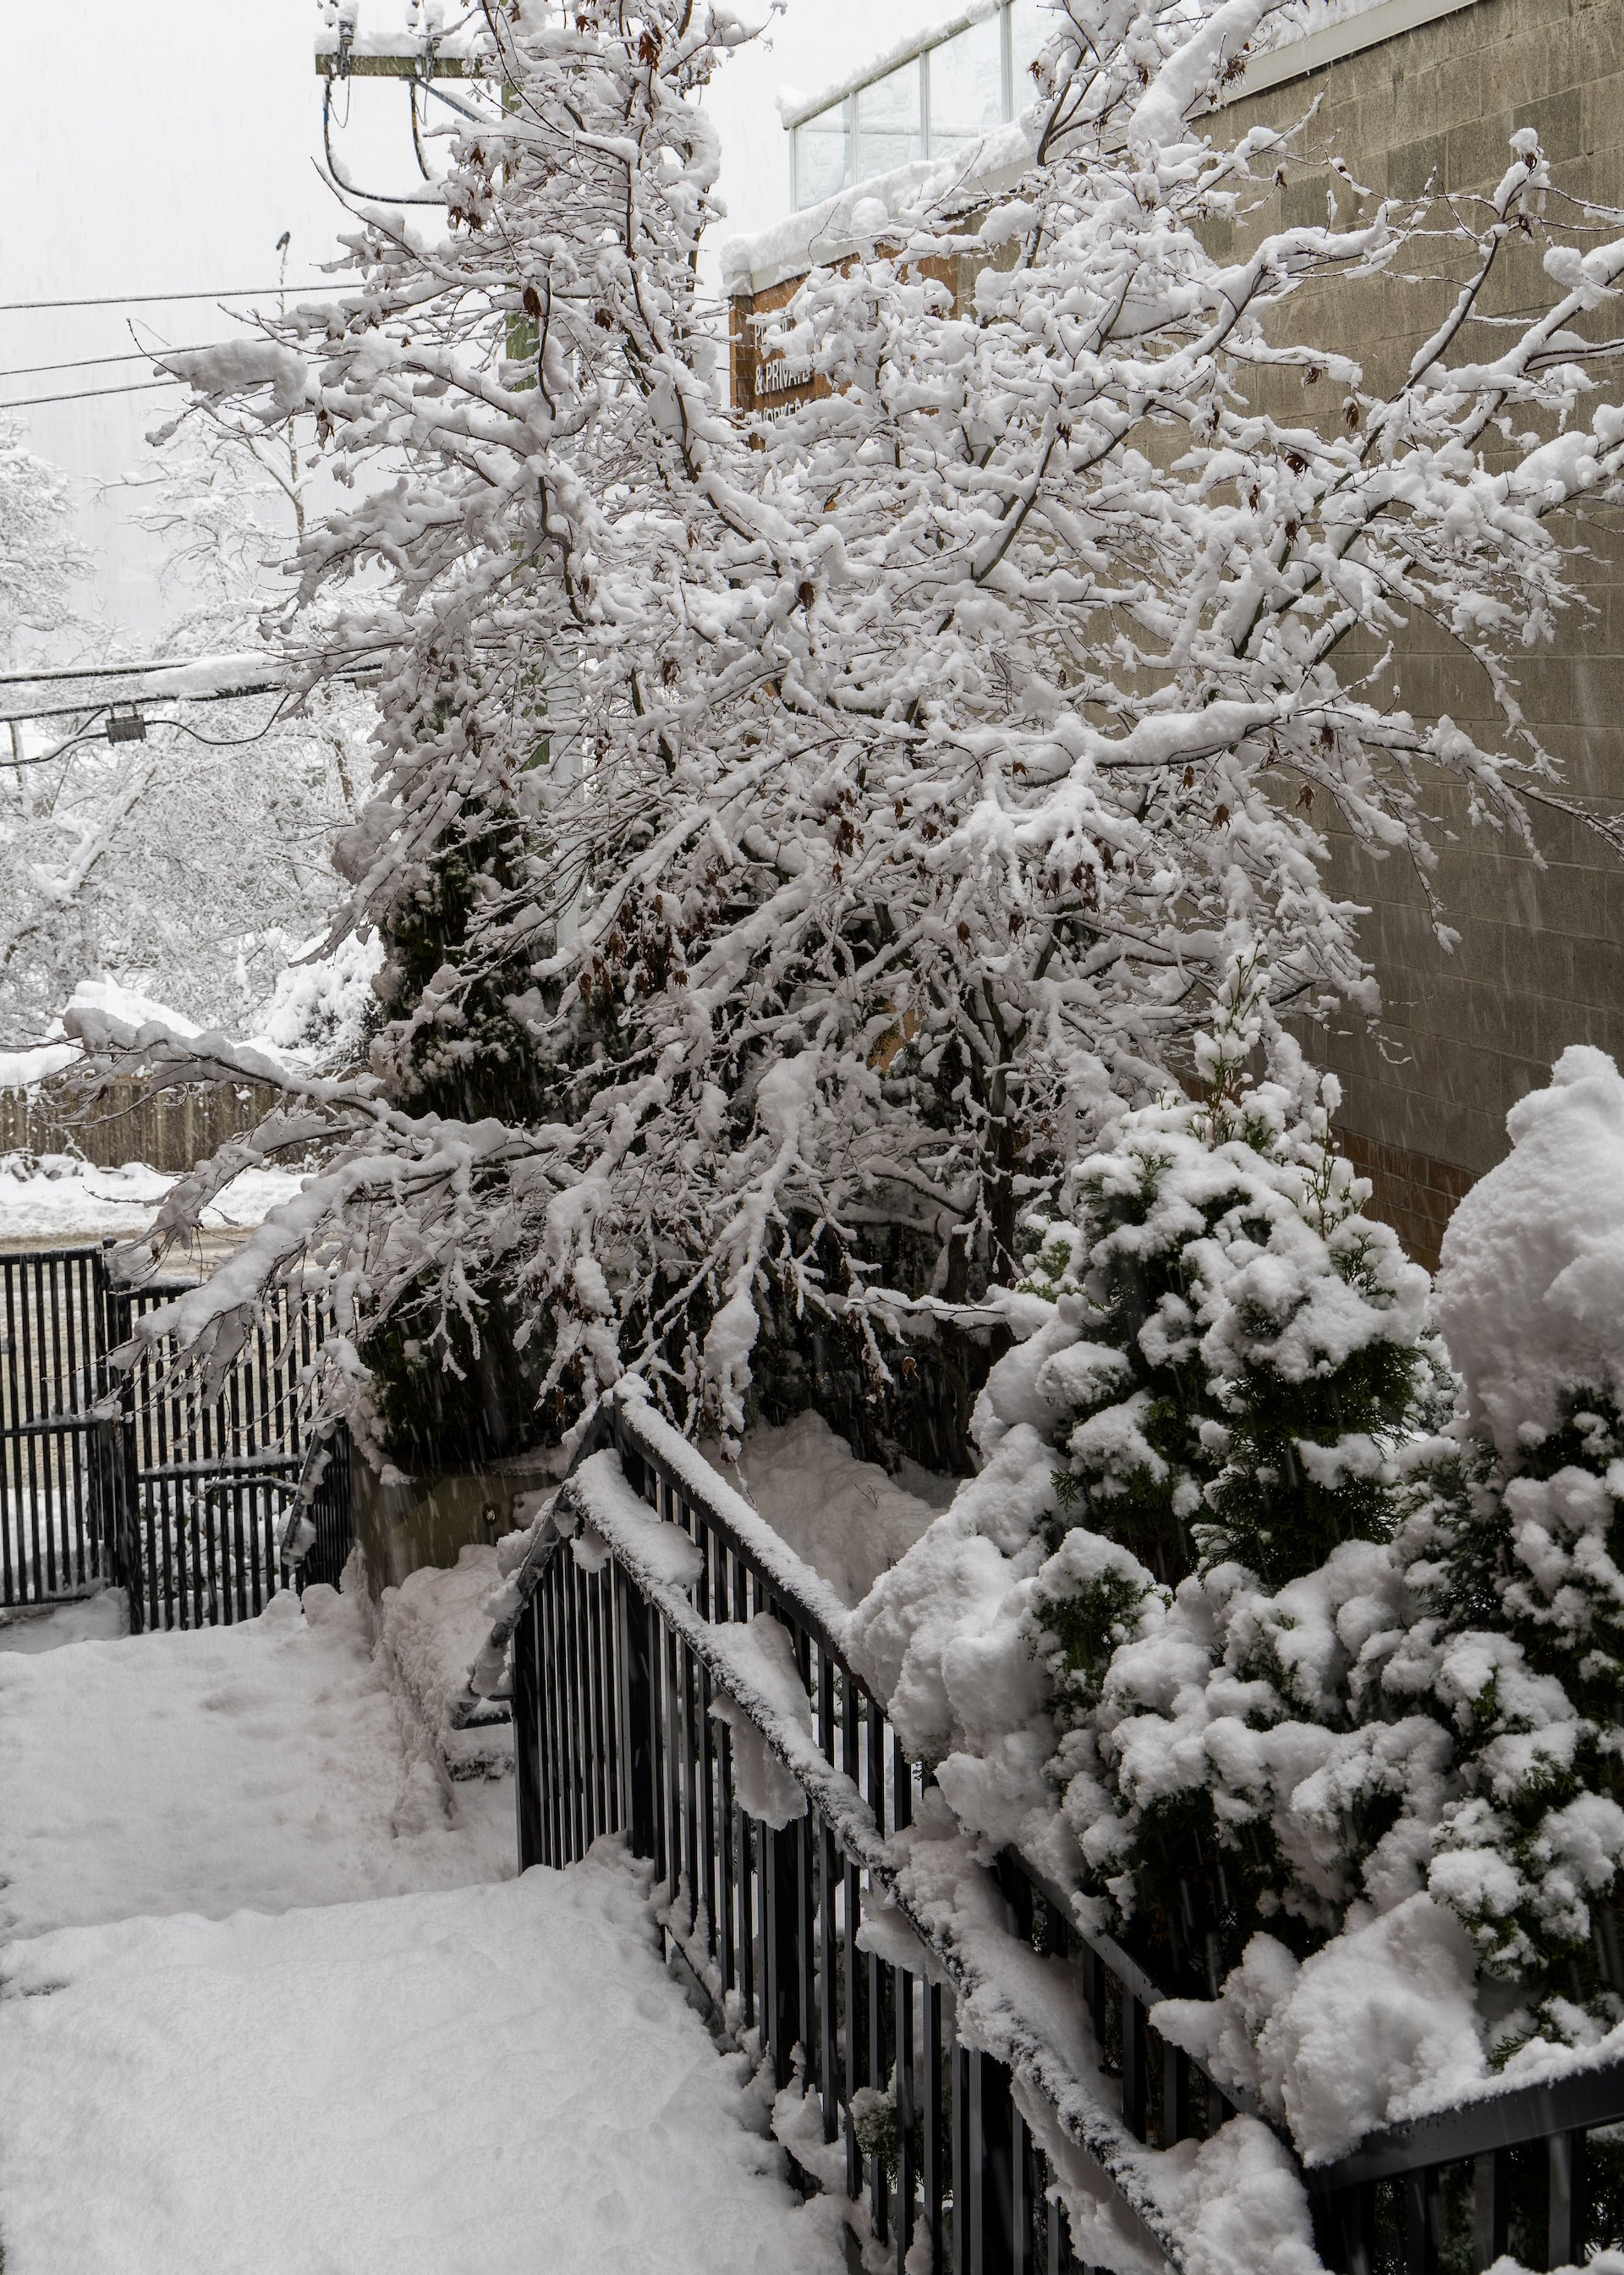  As it had been snowing most of the night, I got up early to shovel the sidewalks. I was greeted by a winter wonderland.  